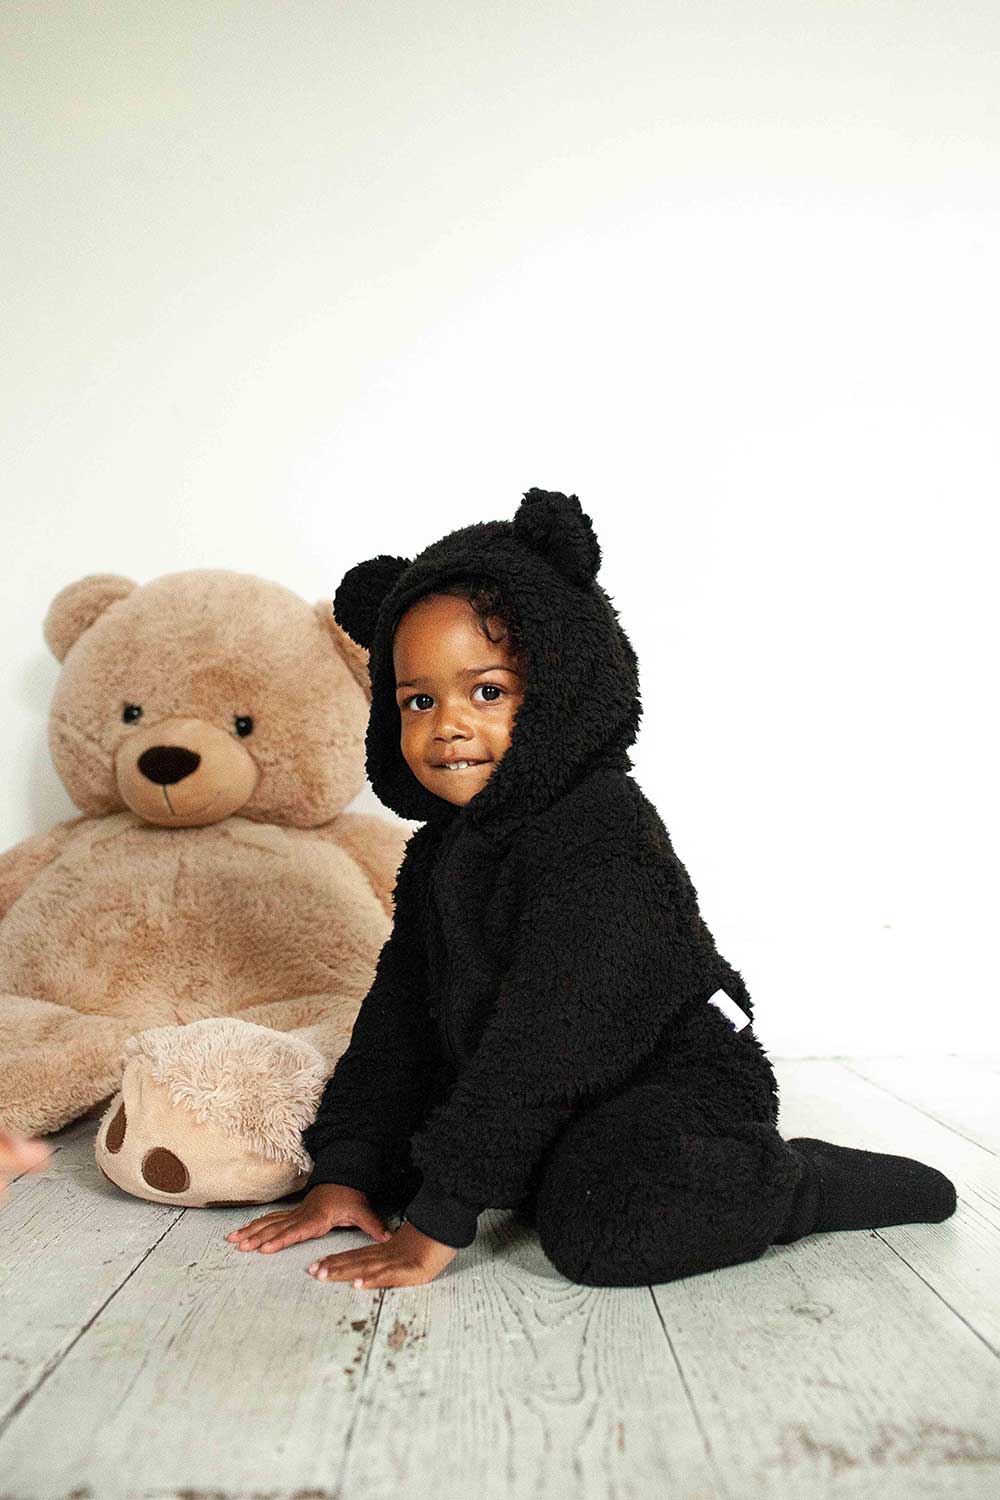 A young child sat on the floor next to a large teddy bear wearing a black bodysuit